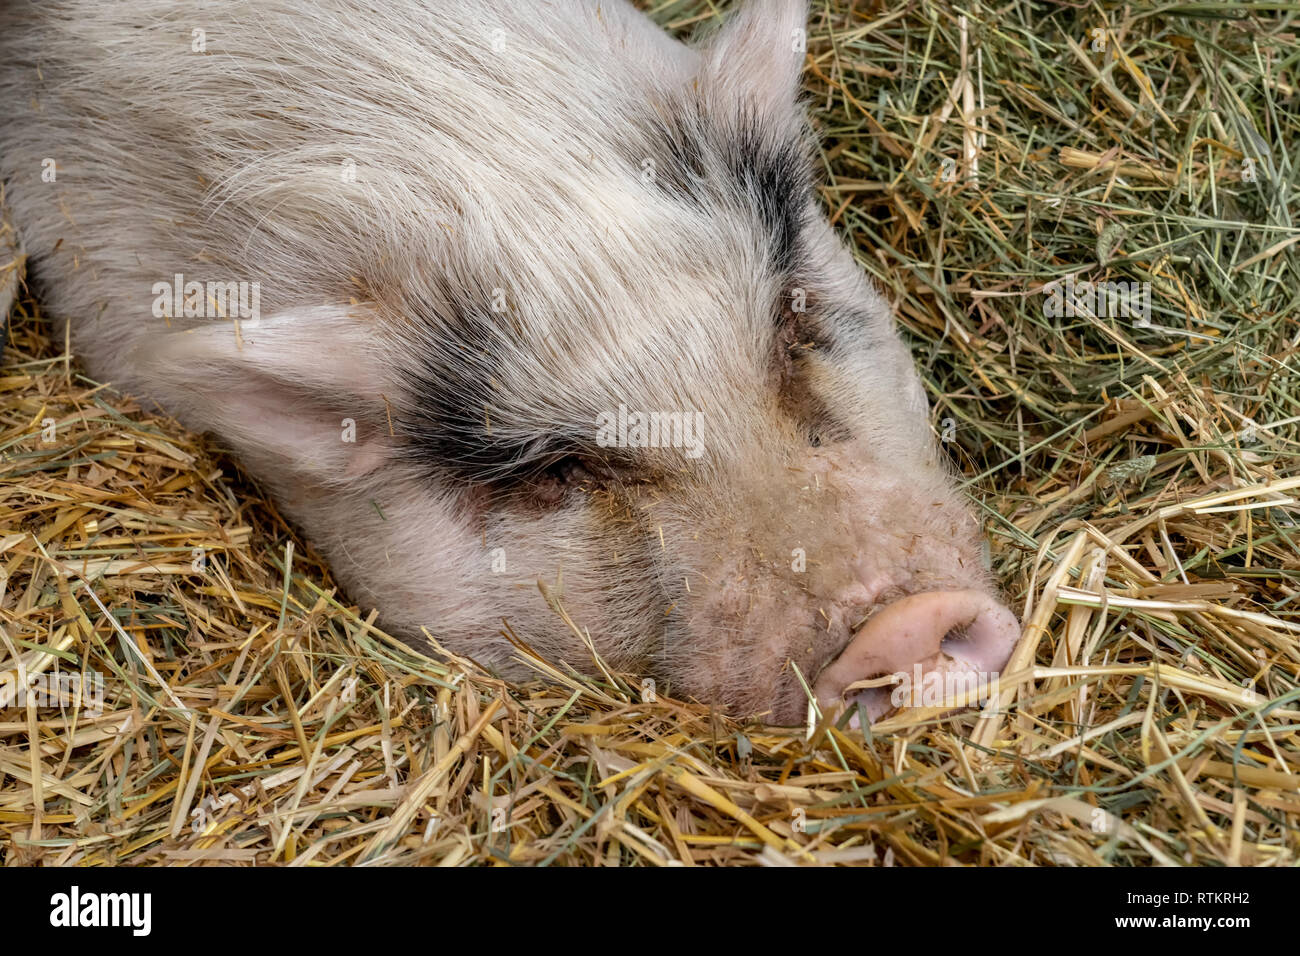 Issaquah, Washington, USA.  Portrait of a Pink Pot-bellied pig partially covered in straw taking a rest.  (PR) Stock Photo